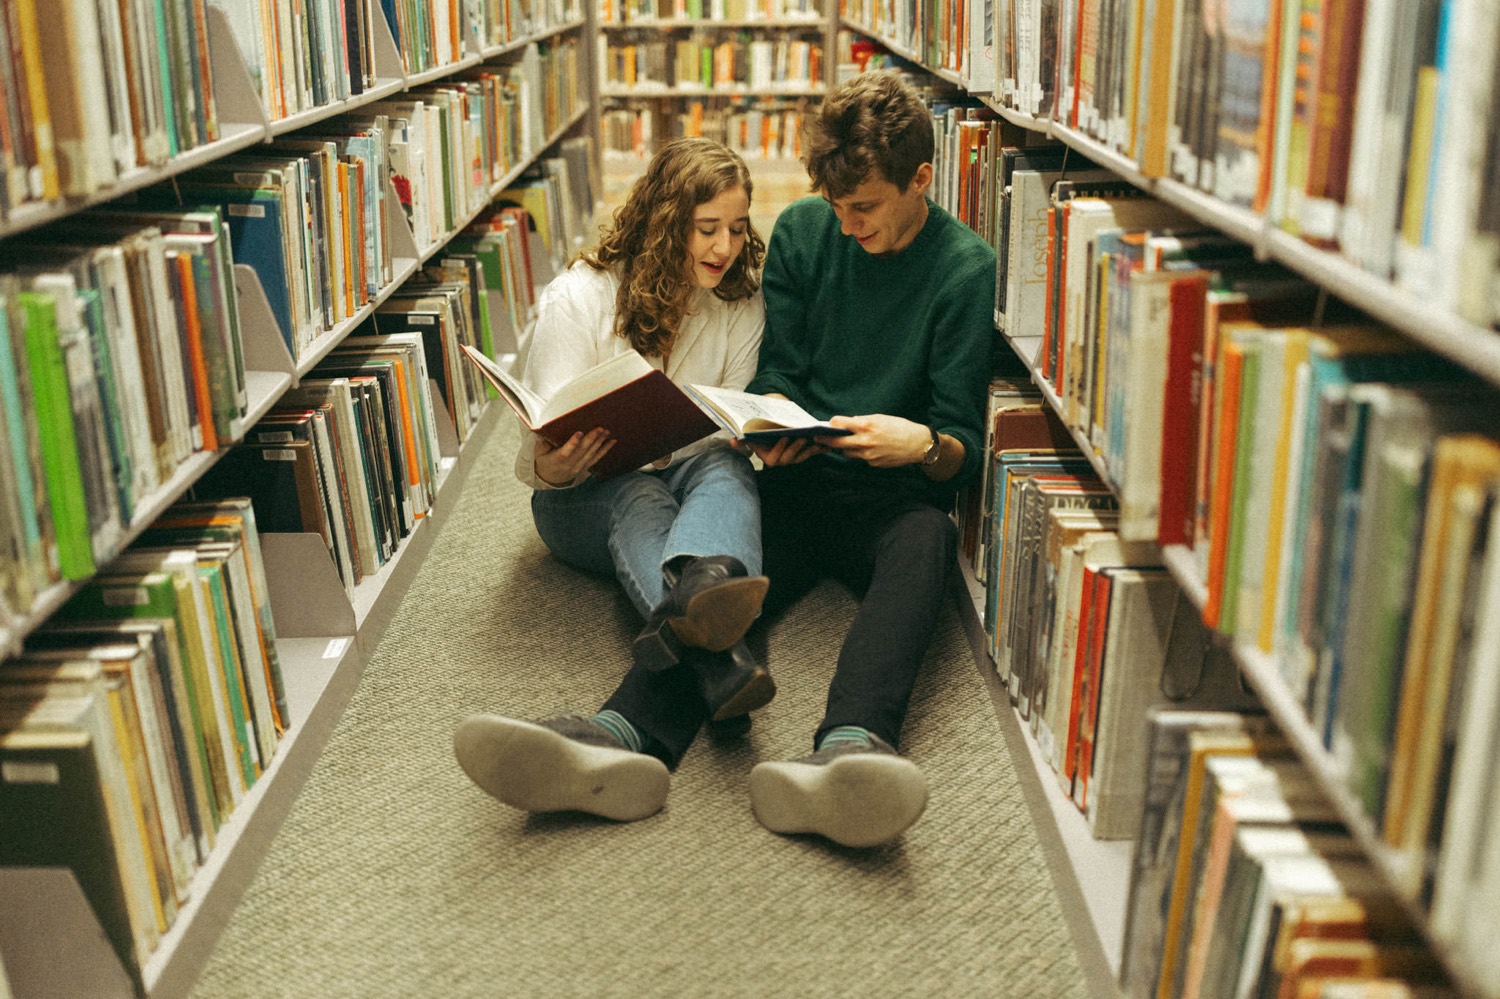 engagement photos at los angeles central library